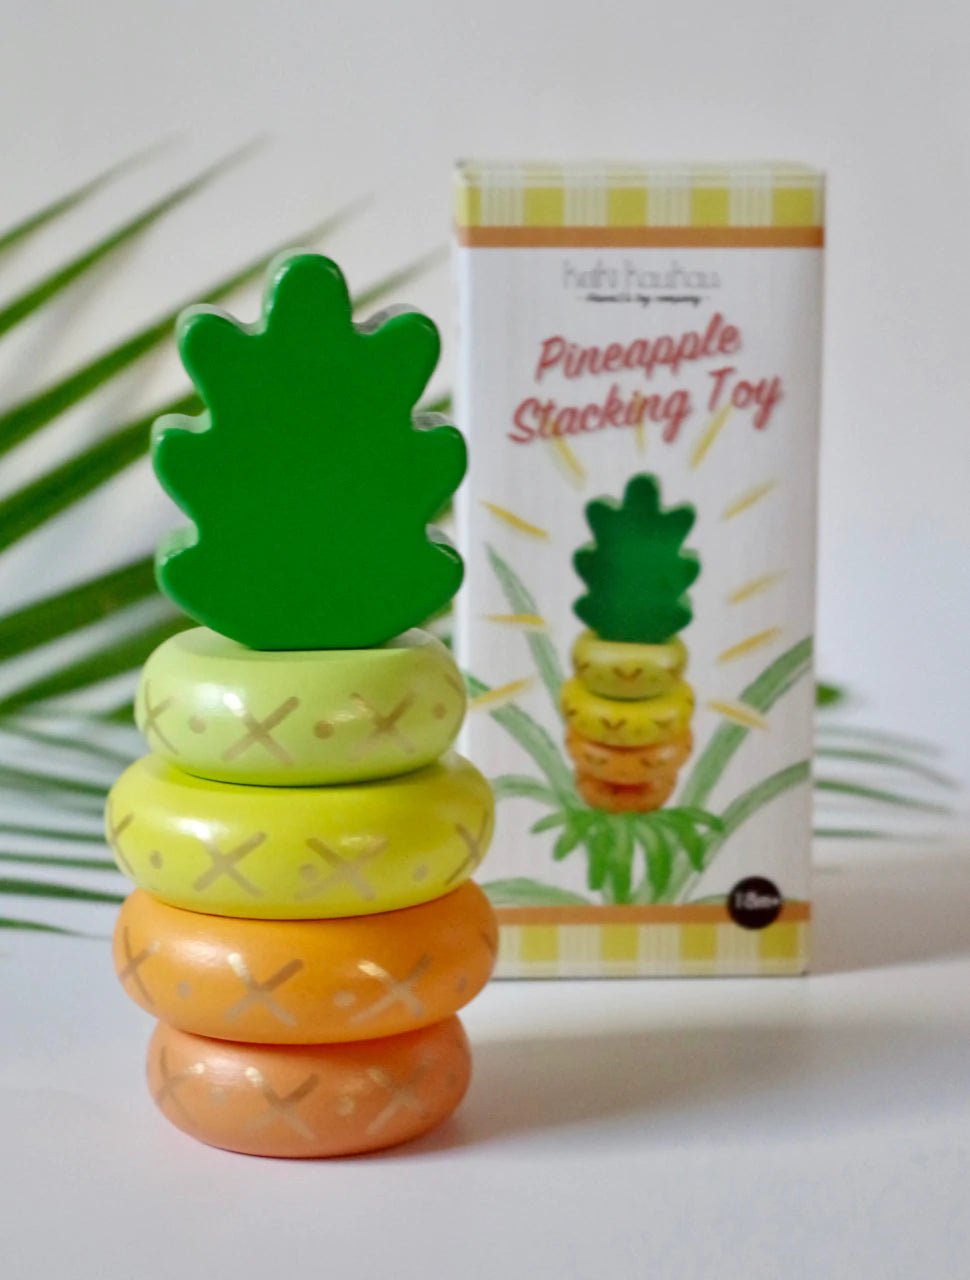 Pineapple Wooden Stacking Toy - SuperMom Headquarters